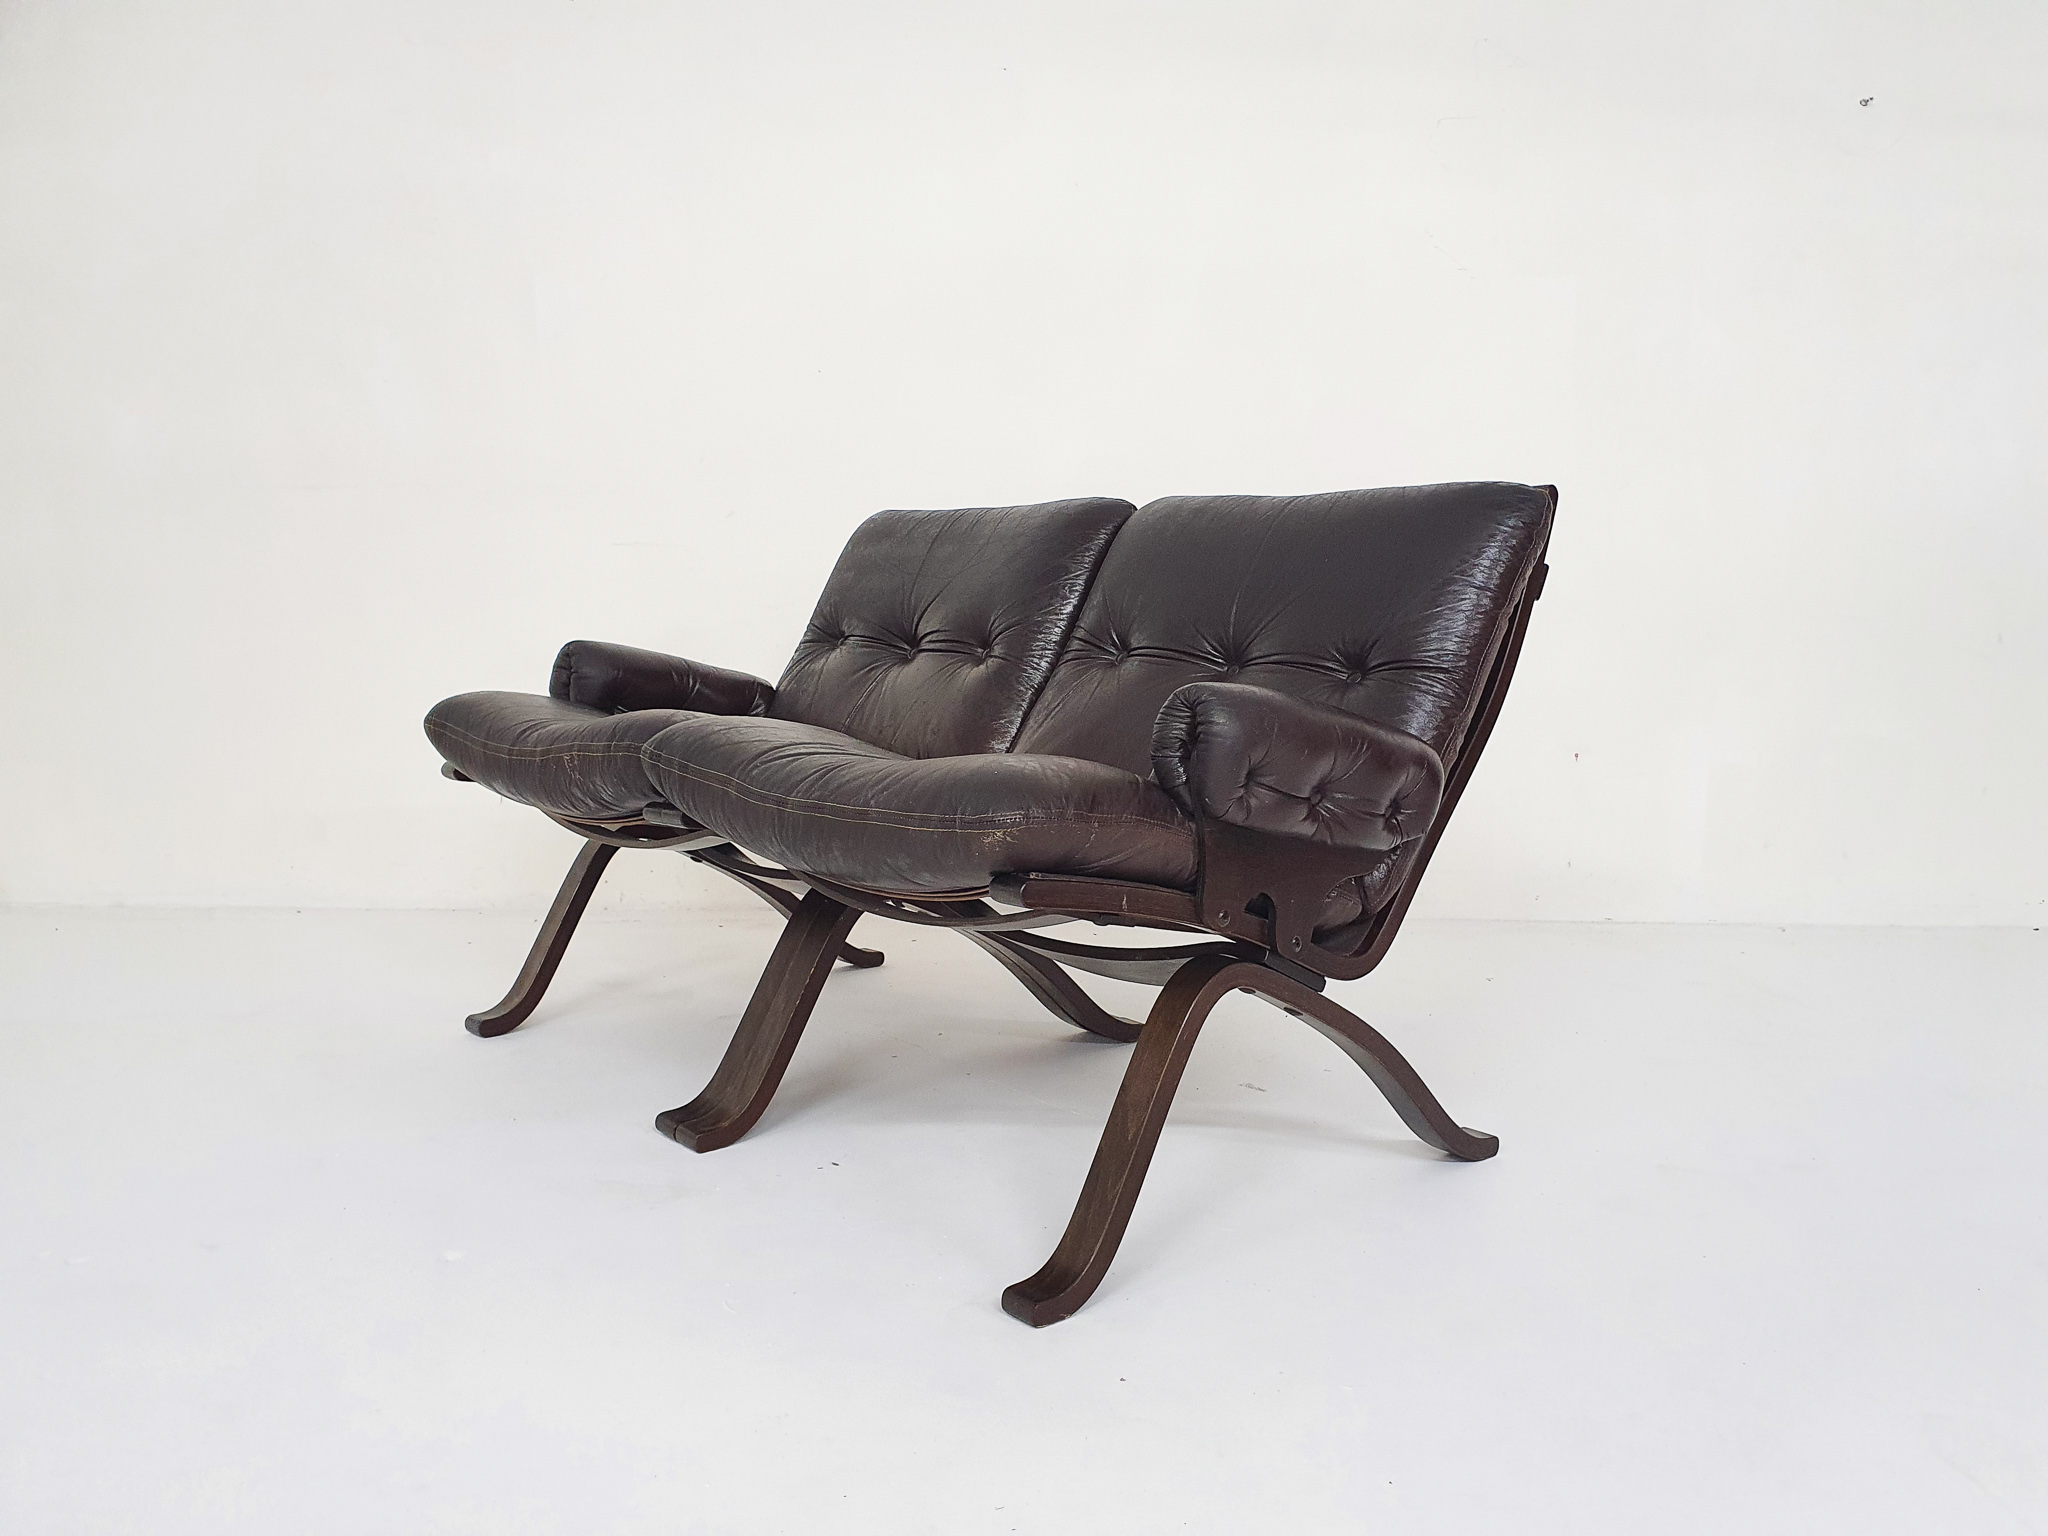 | at Design Buy Seating Vintage Als Oud Zo Sofas Goed